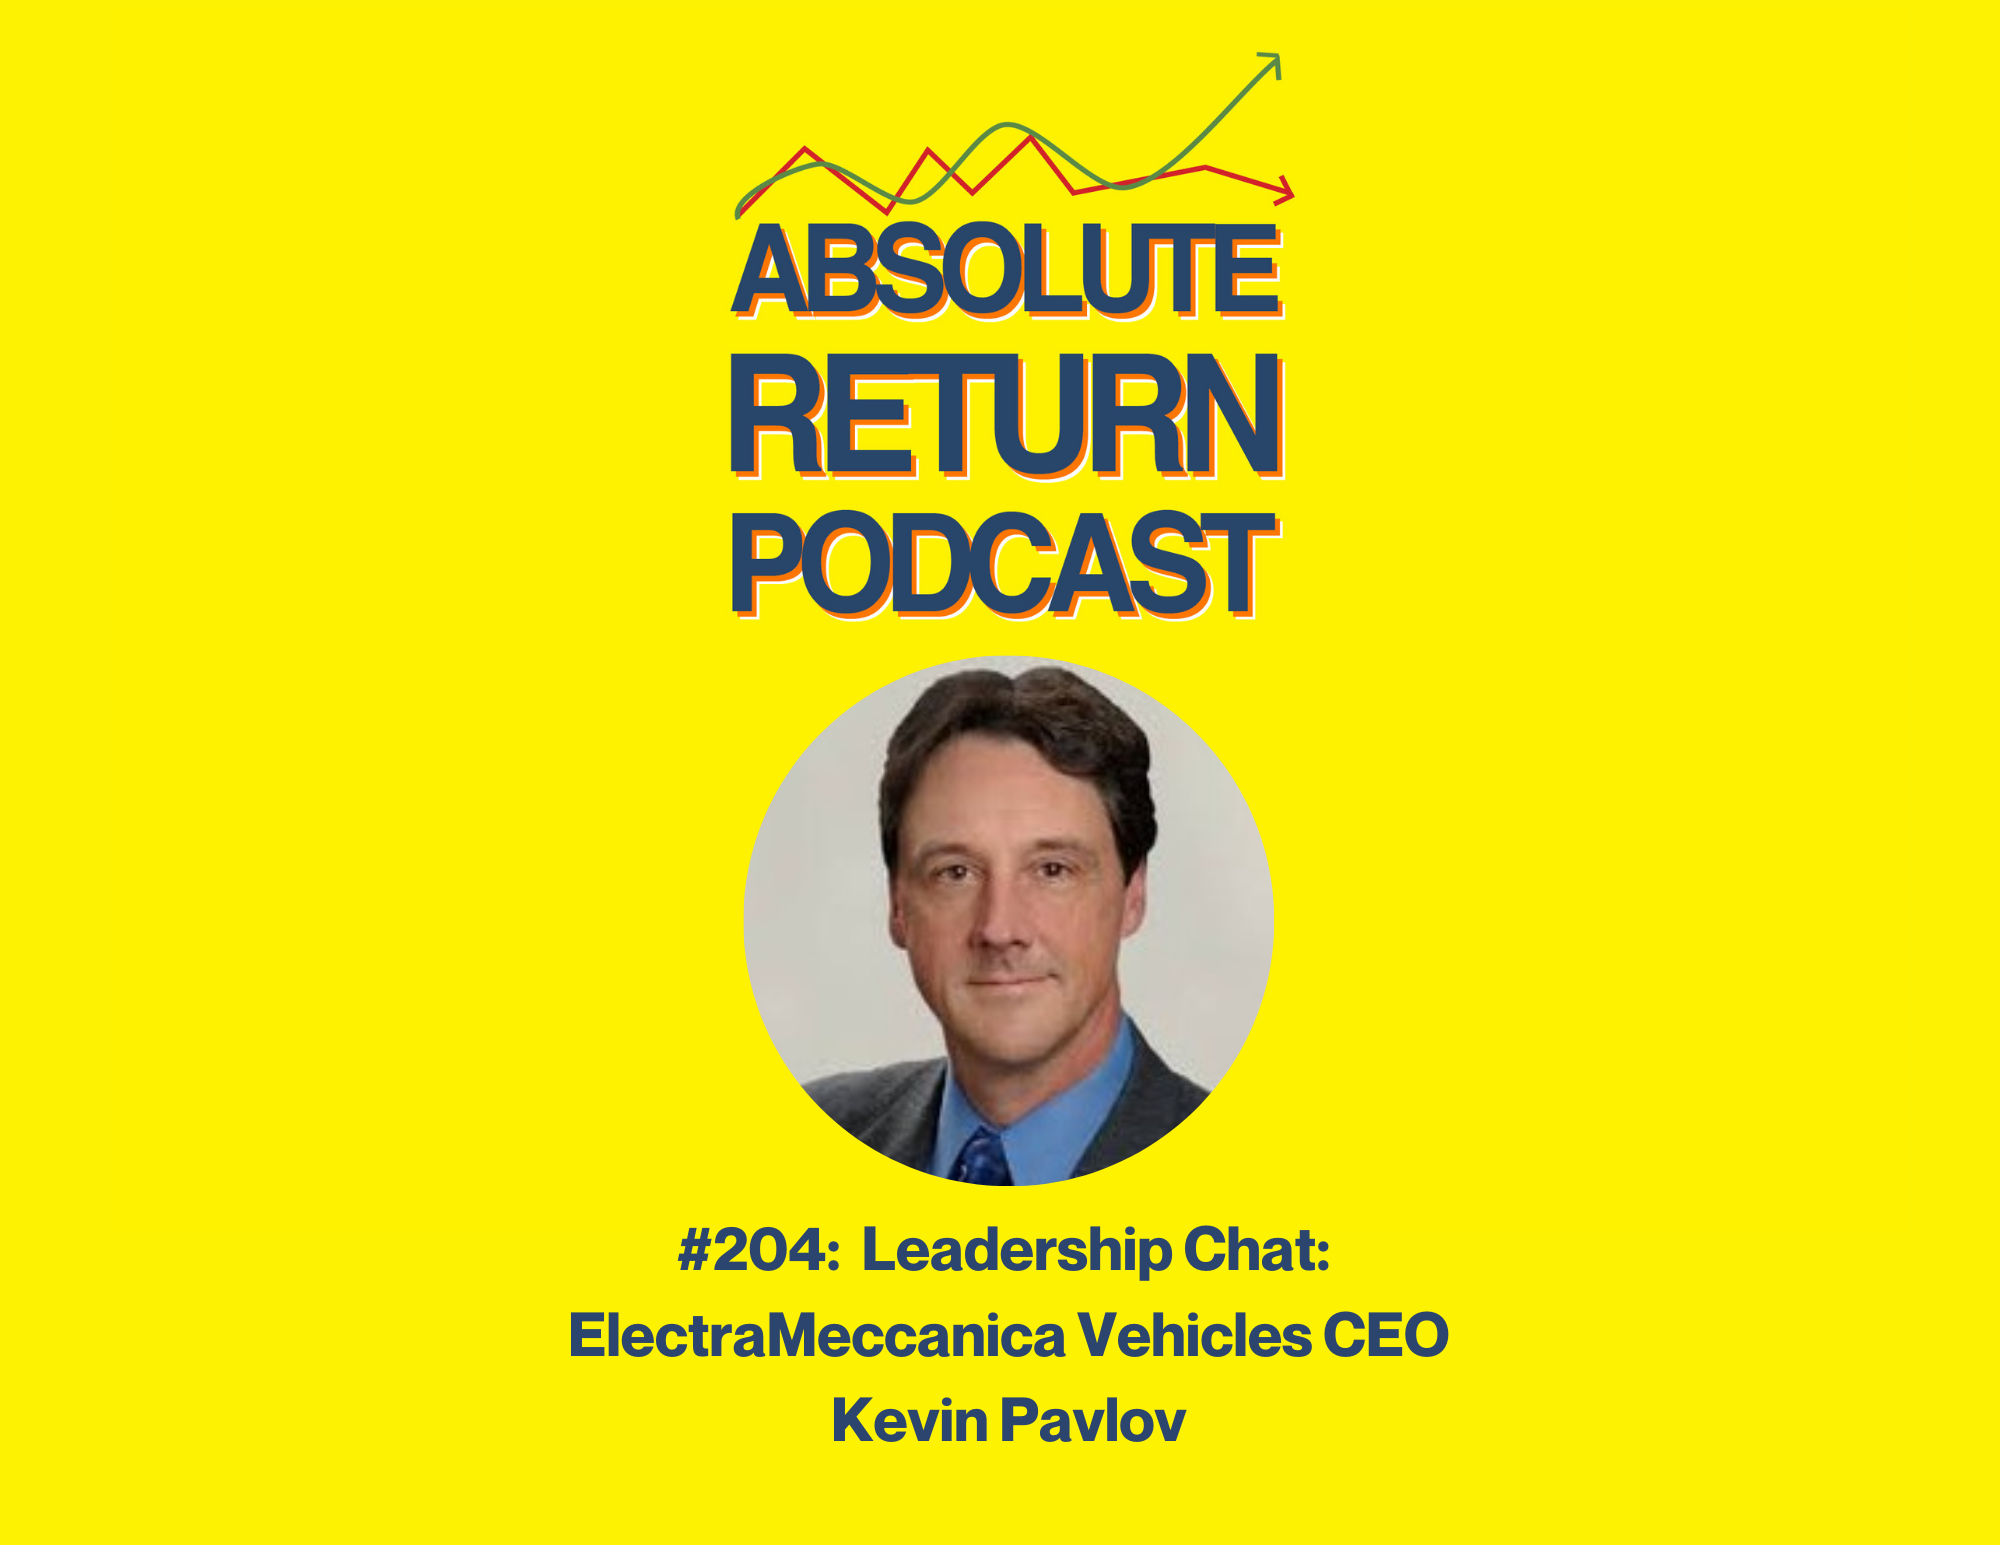 Absolute Return Podcast #204: Leadership Chat: ElectraMeccanica Vehicles CEO Kevin Pavlov